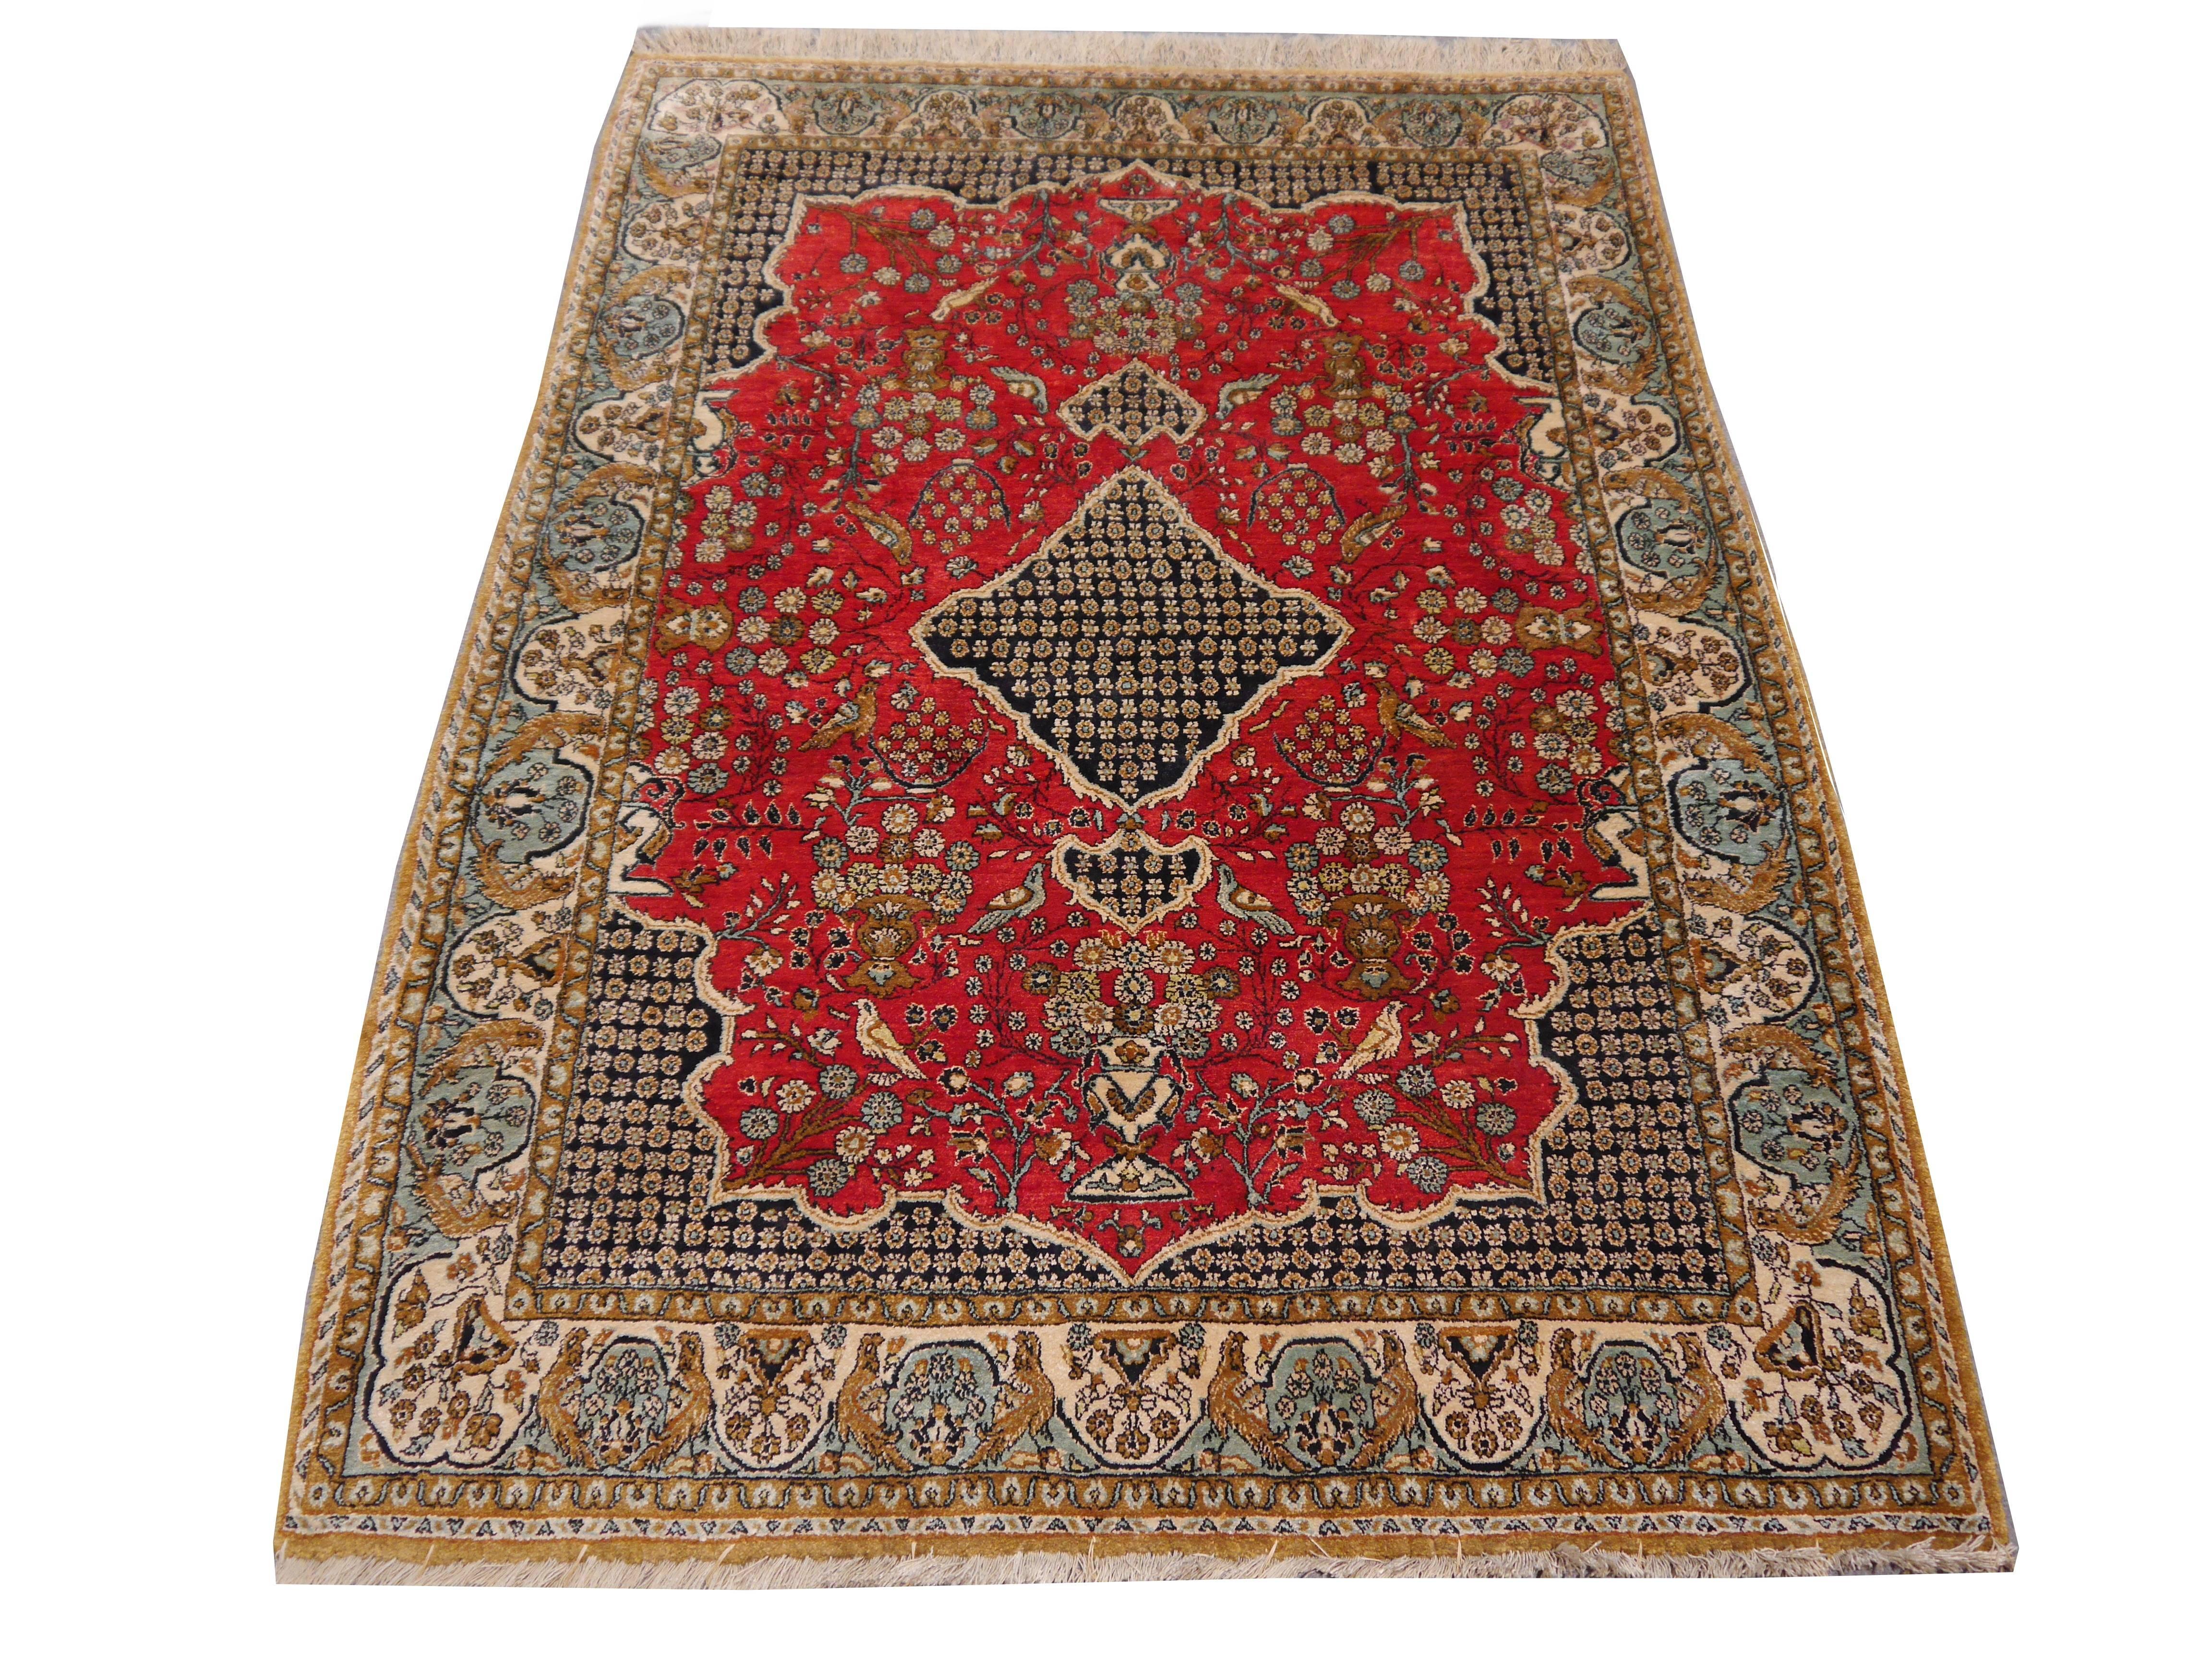 Vintage Persian rug Qum - all pure silk. Hand-knotted in central Persia, mid-20th century using organic dyes and handspun pure silk.